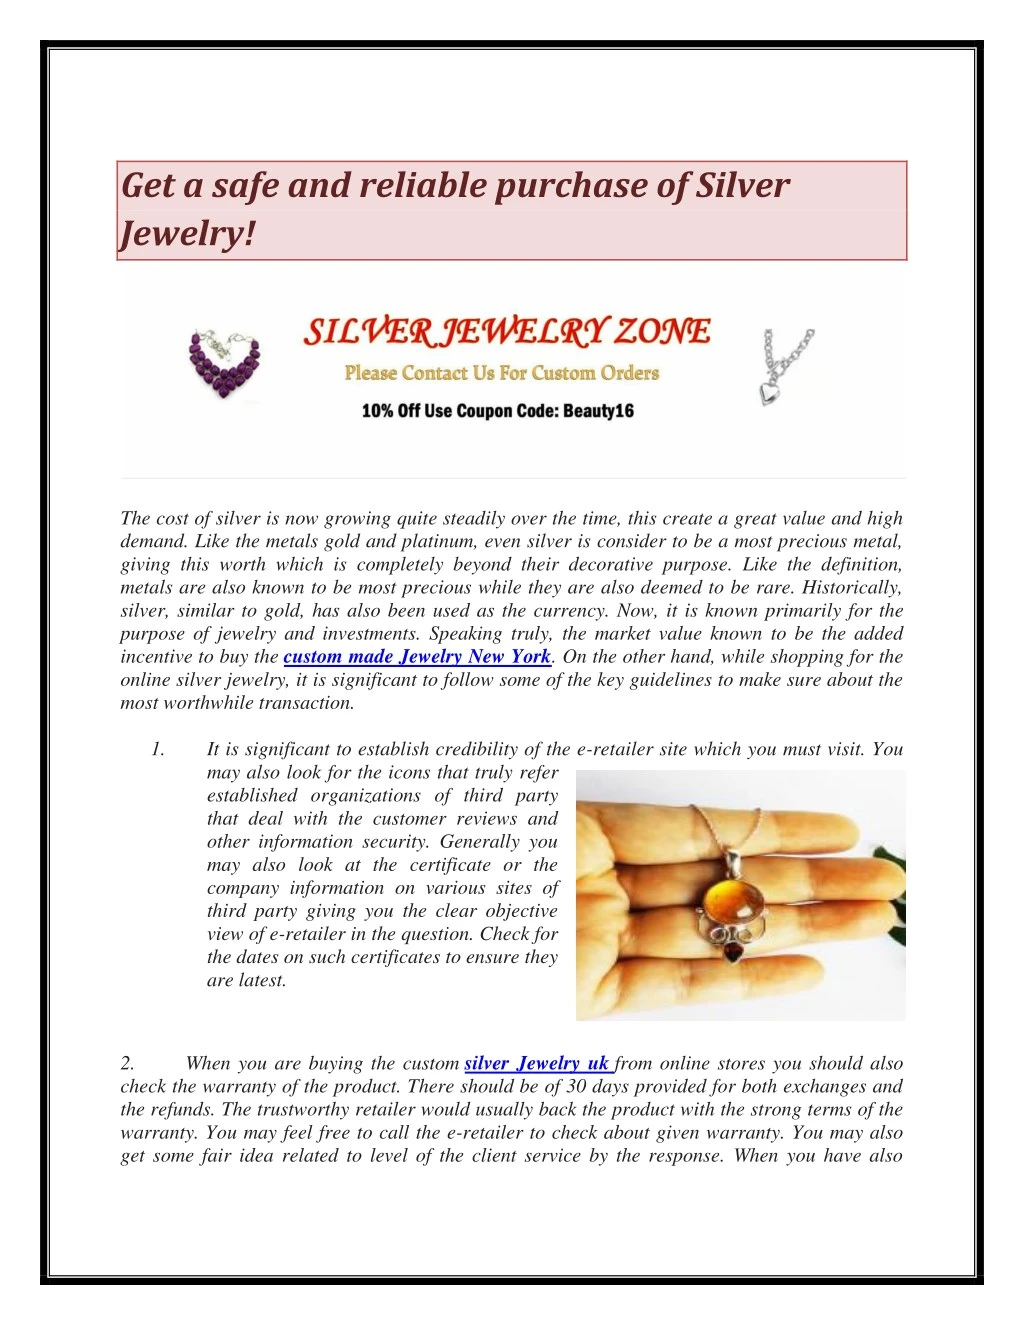 get a safe and reliable purchase of silver jewelry